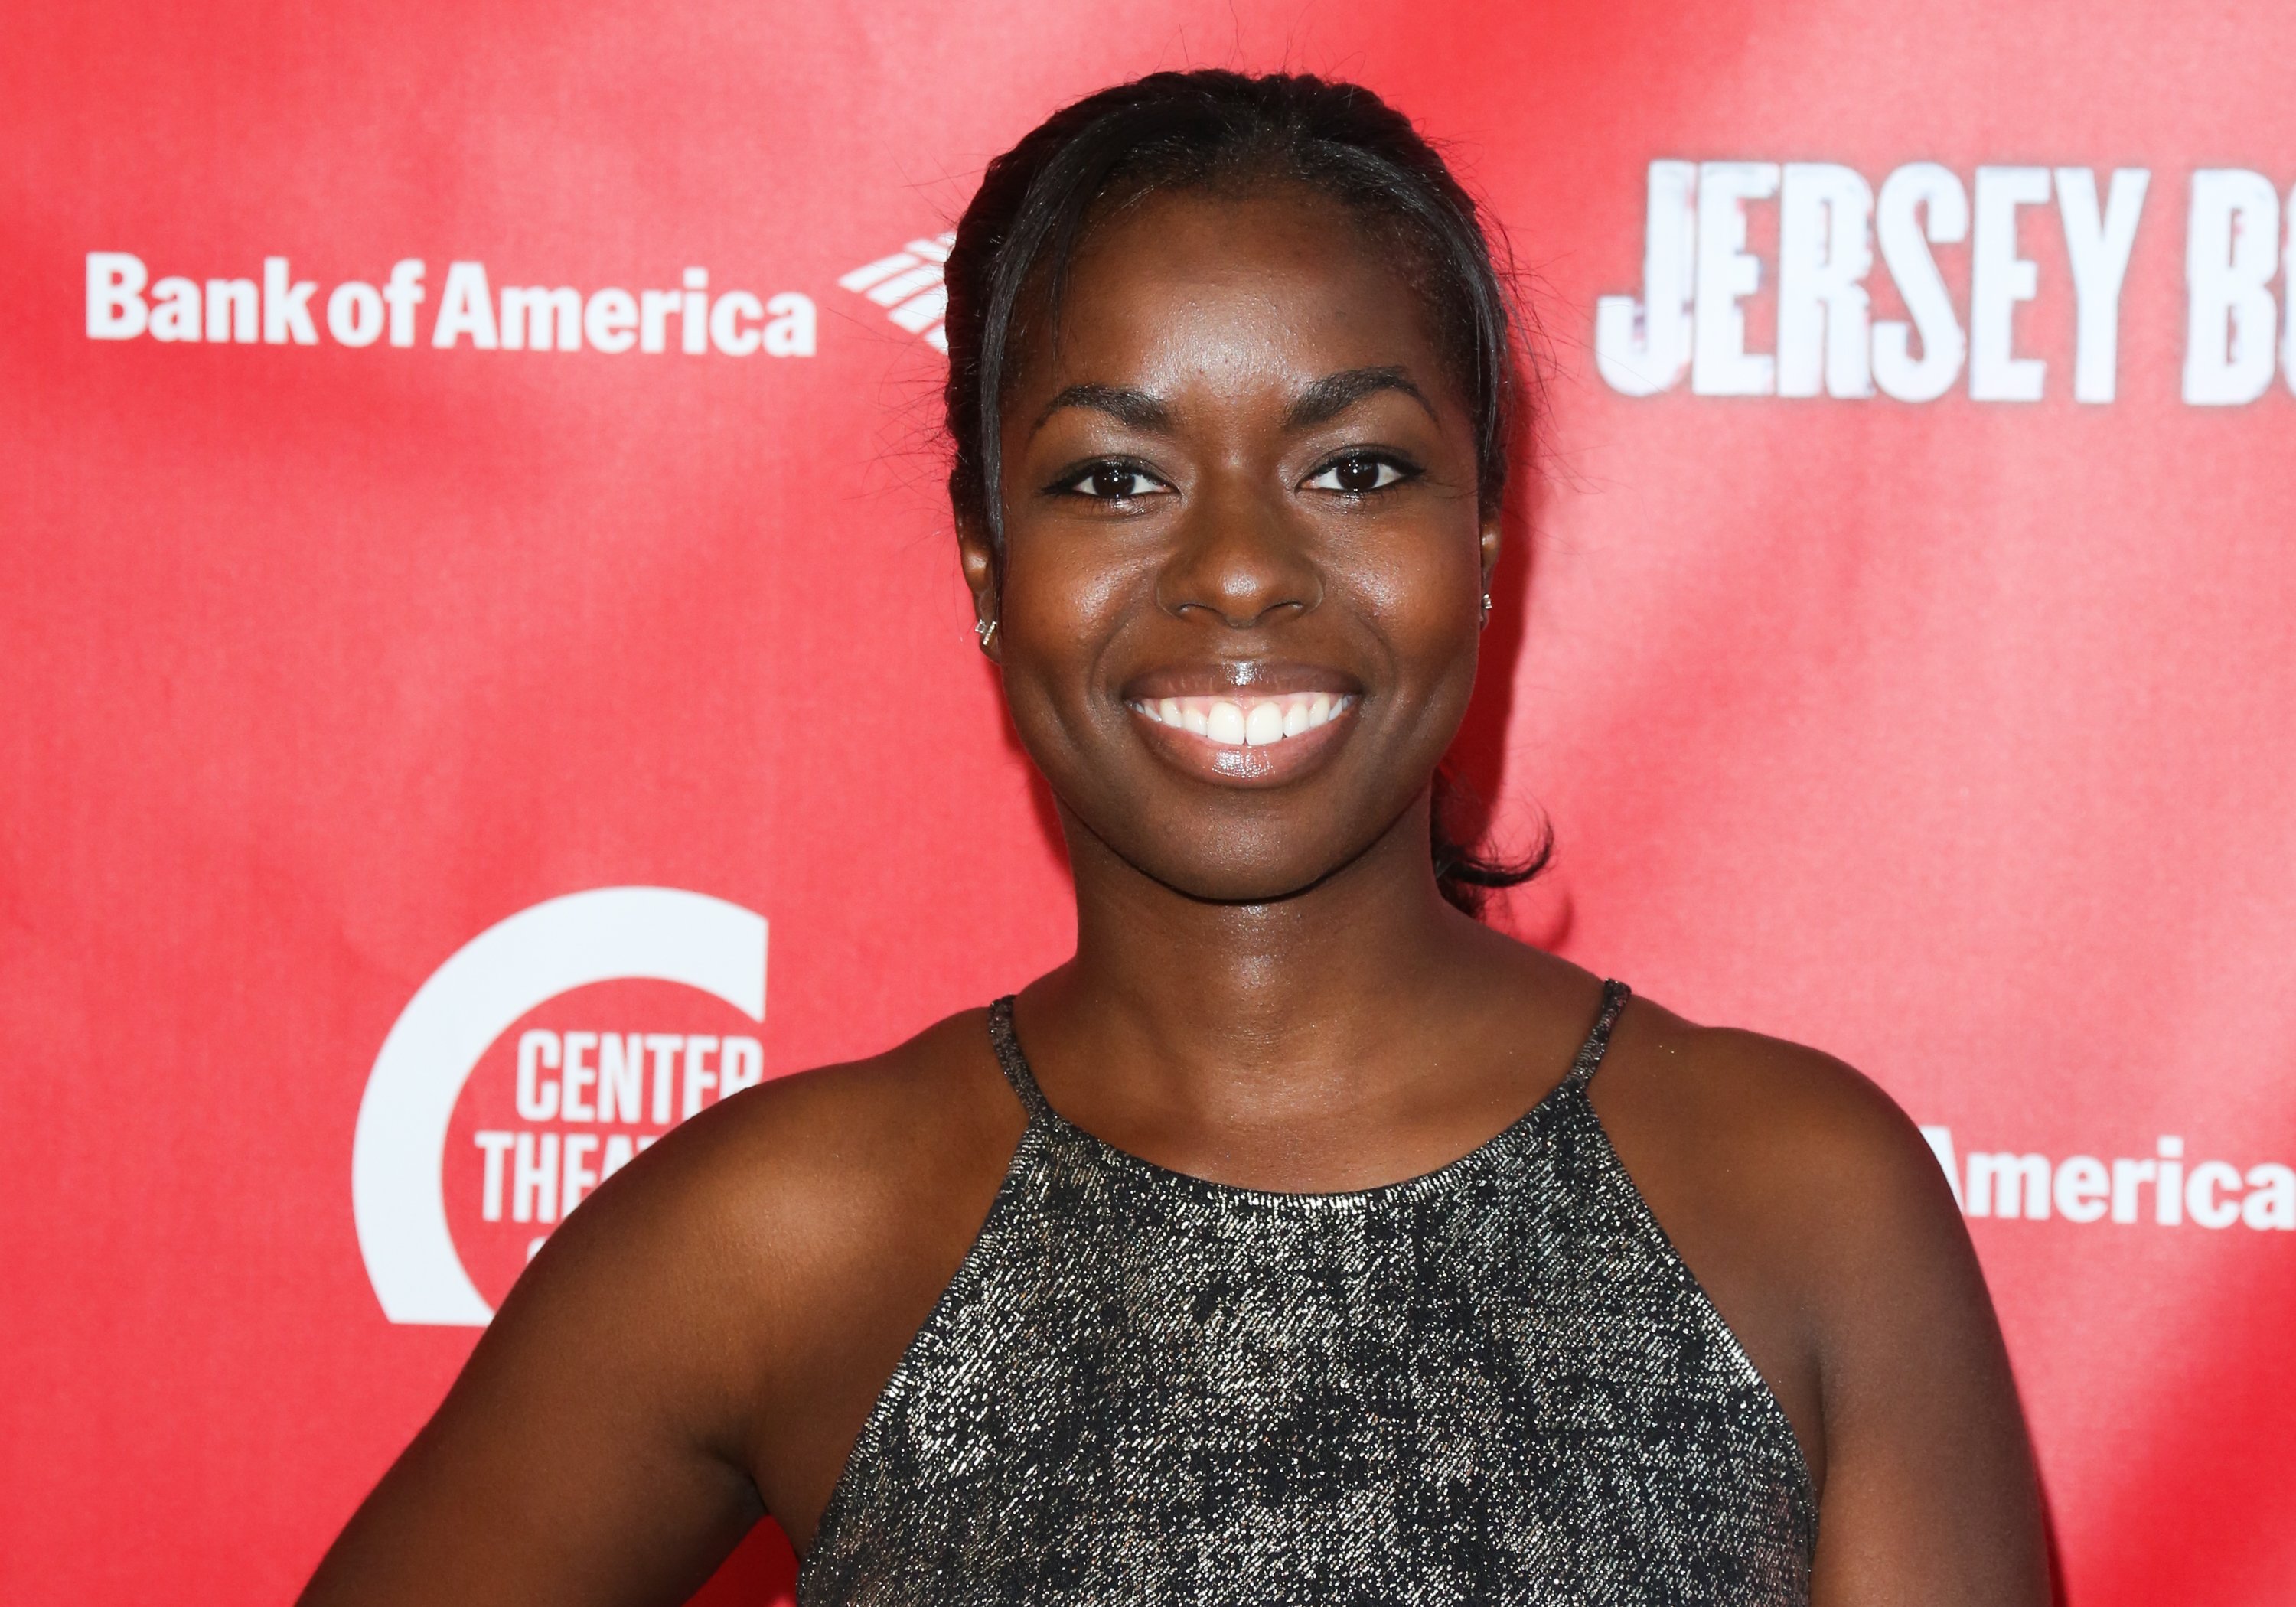 Camille Winbush at the opening night of "Jersey Boys" at the Ahmanson Theatre in Los Angeles on May 18, 2017.| Photo: Getty Images